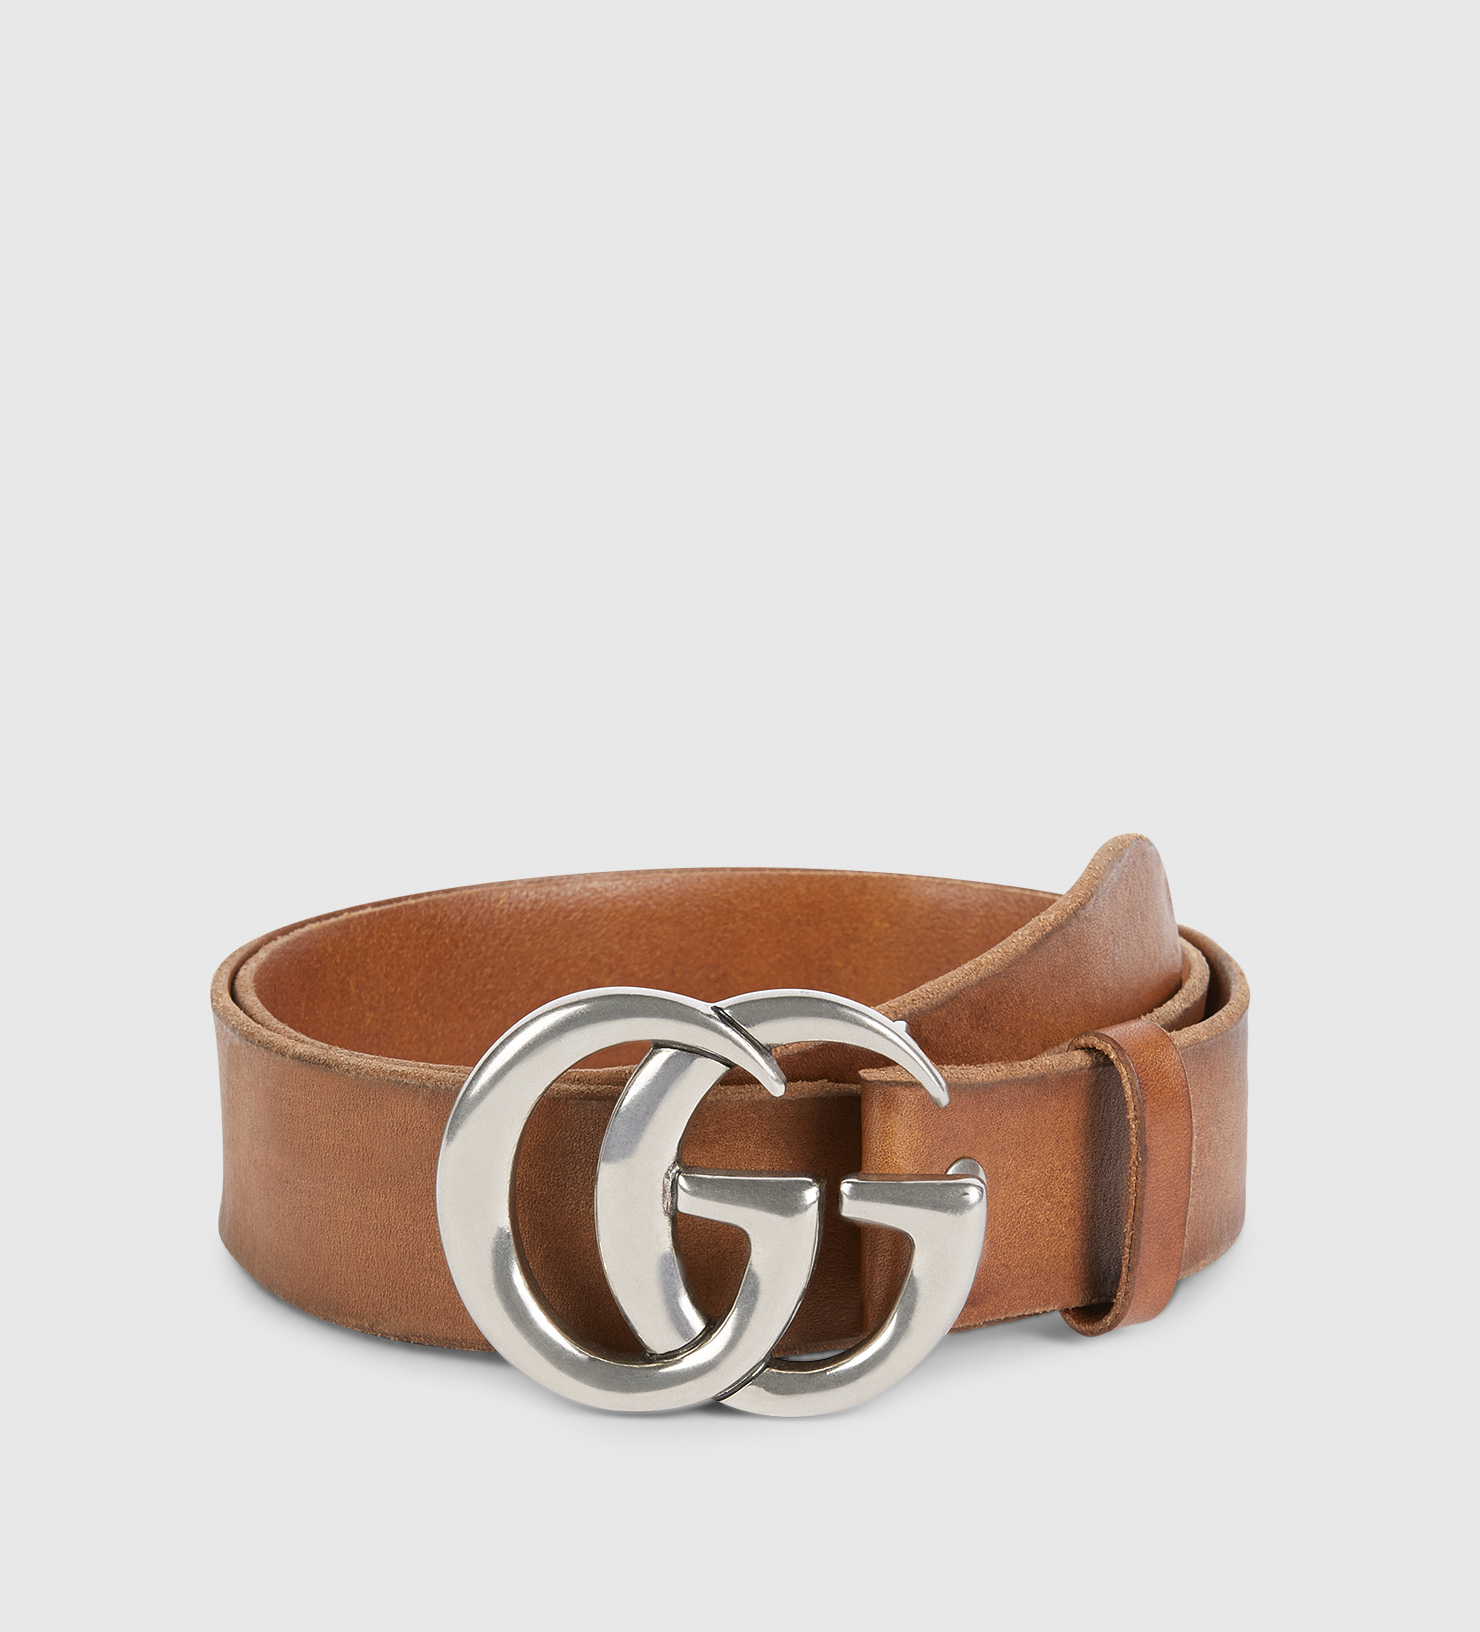 Lyst - Gucci Leather Belt With Double G Buckle in Brown for Men